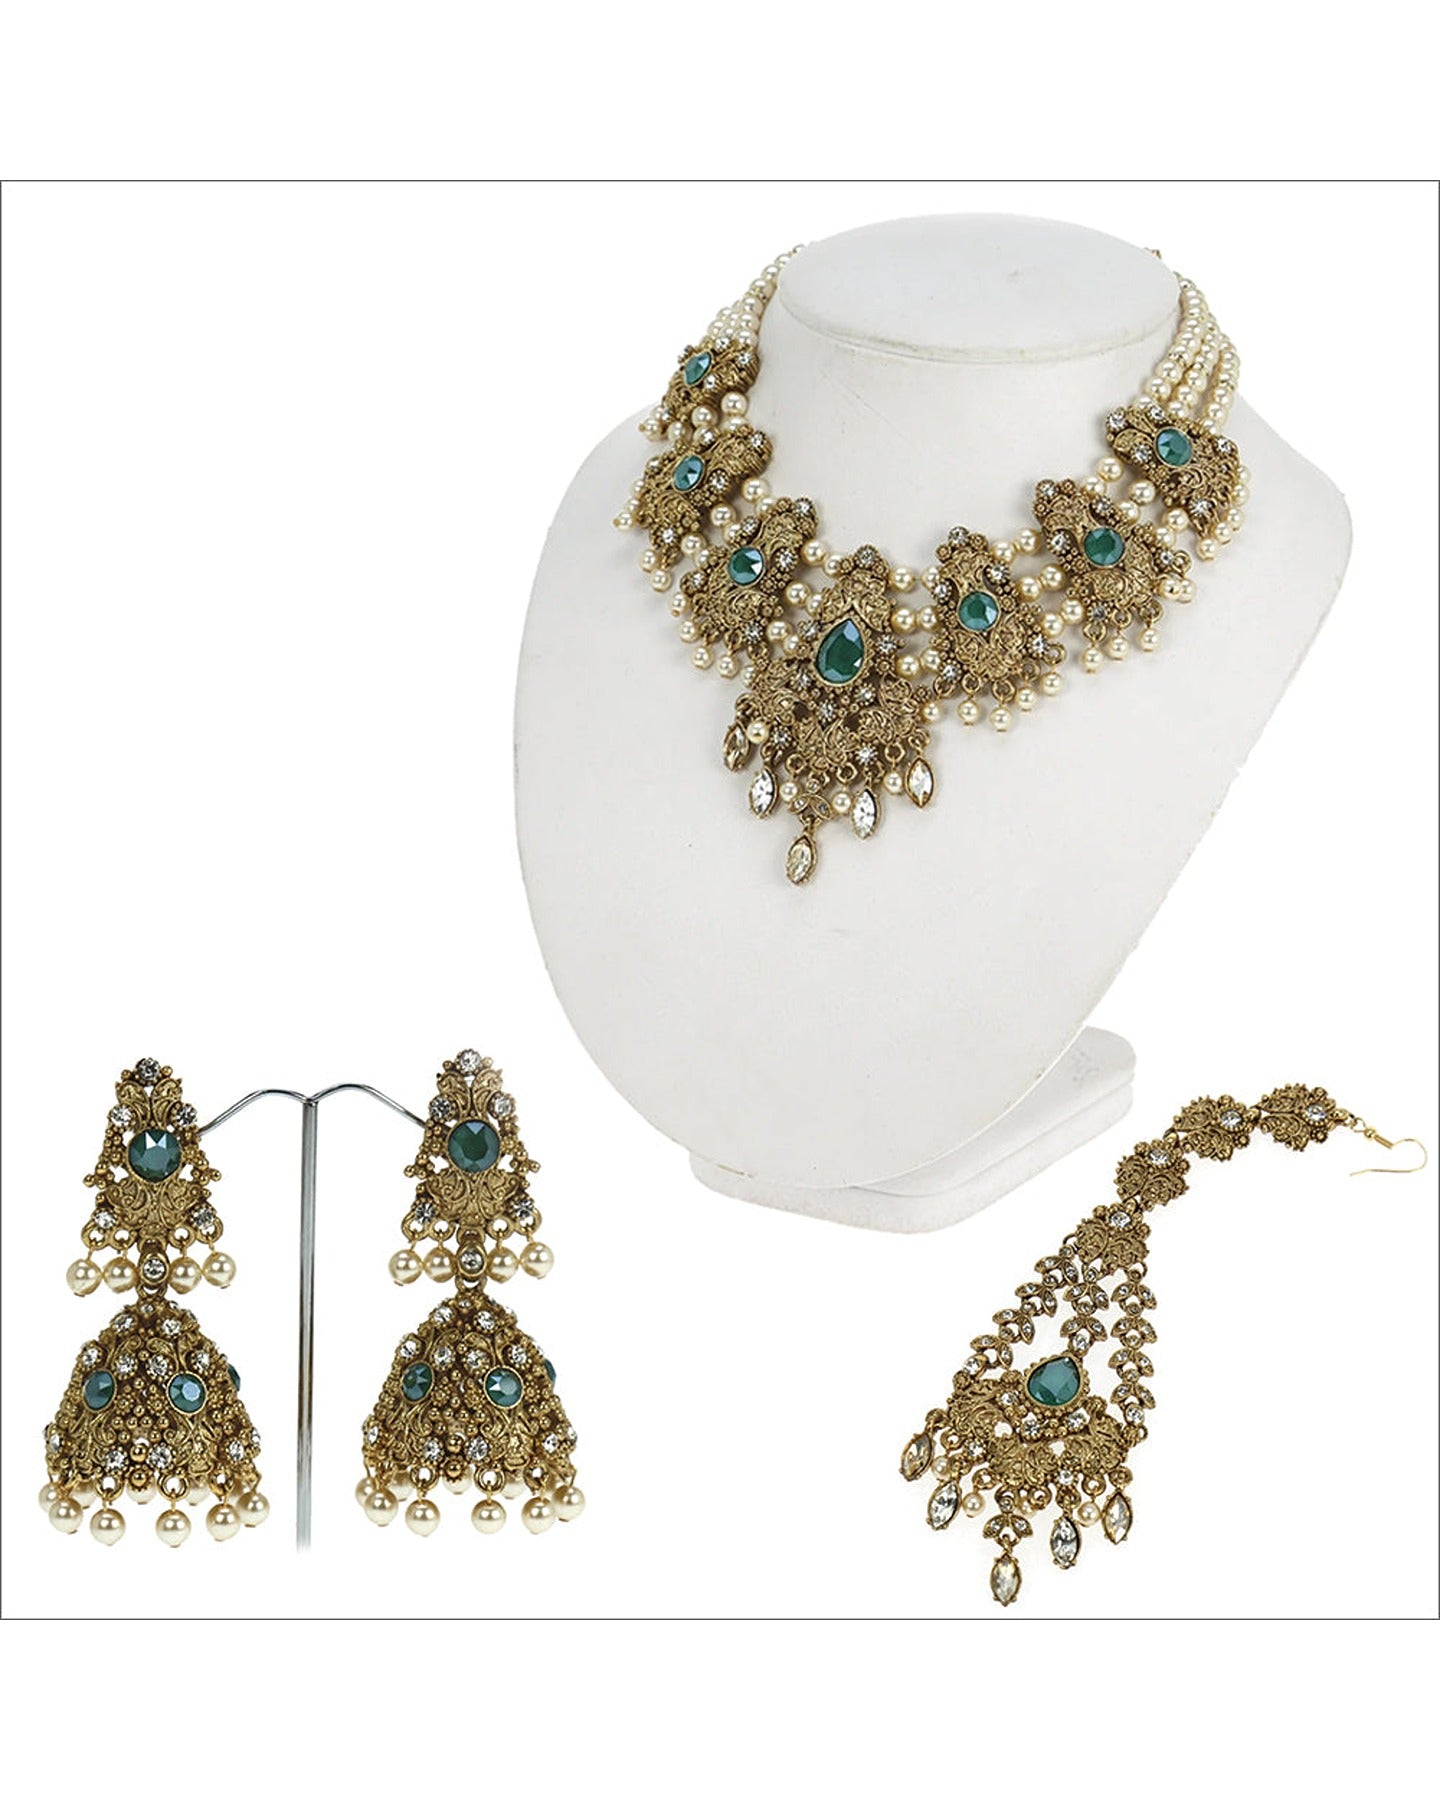 Antique Gold Jewelry with Royal Green Bead and Crystal Stones